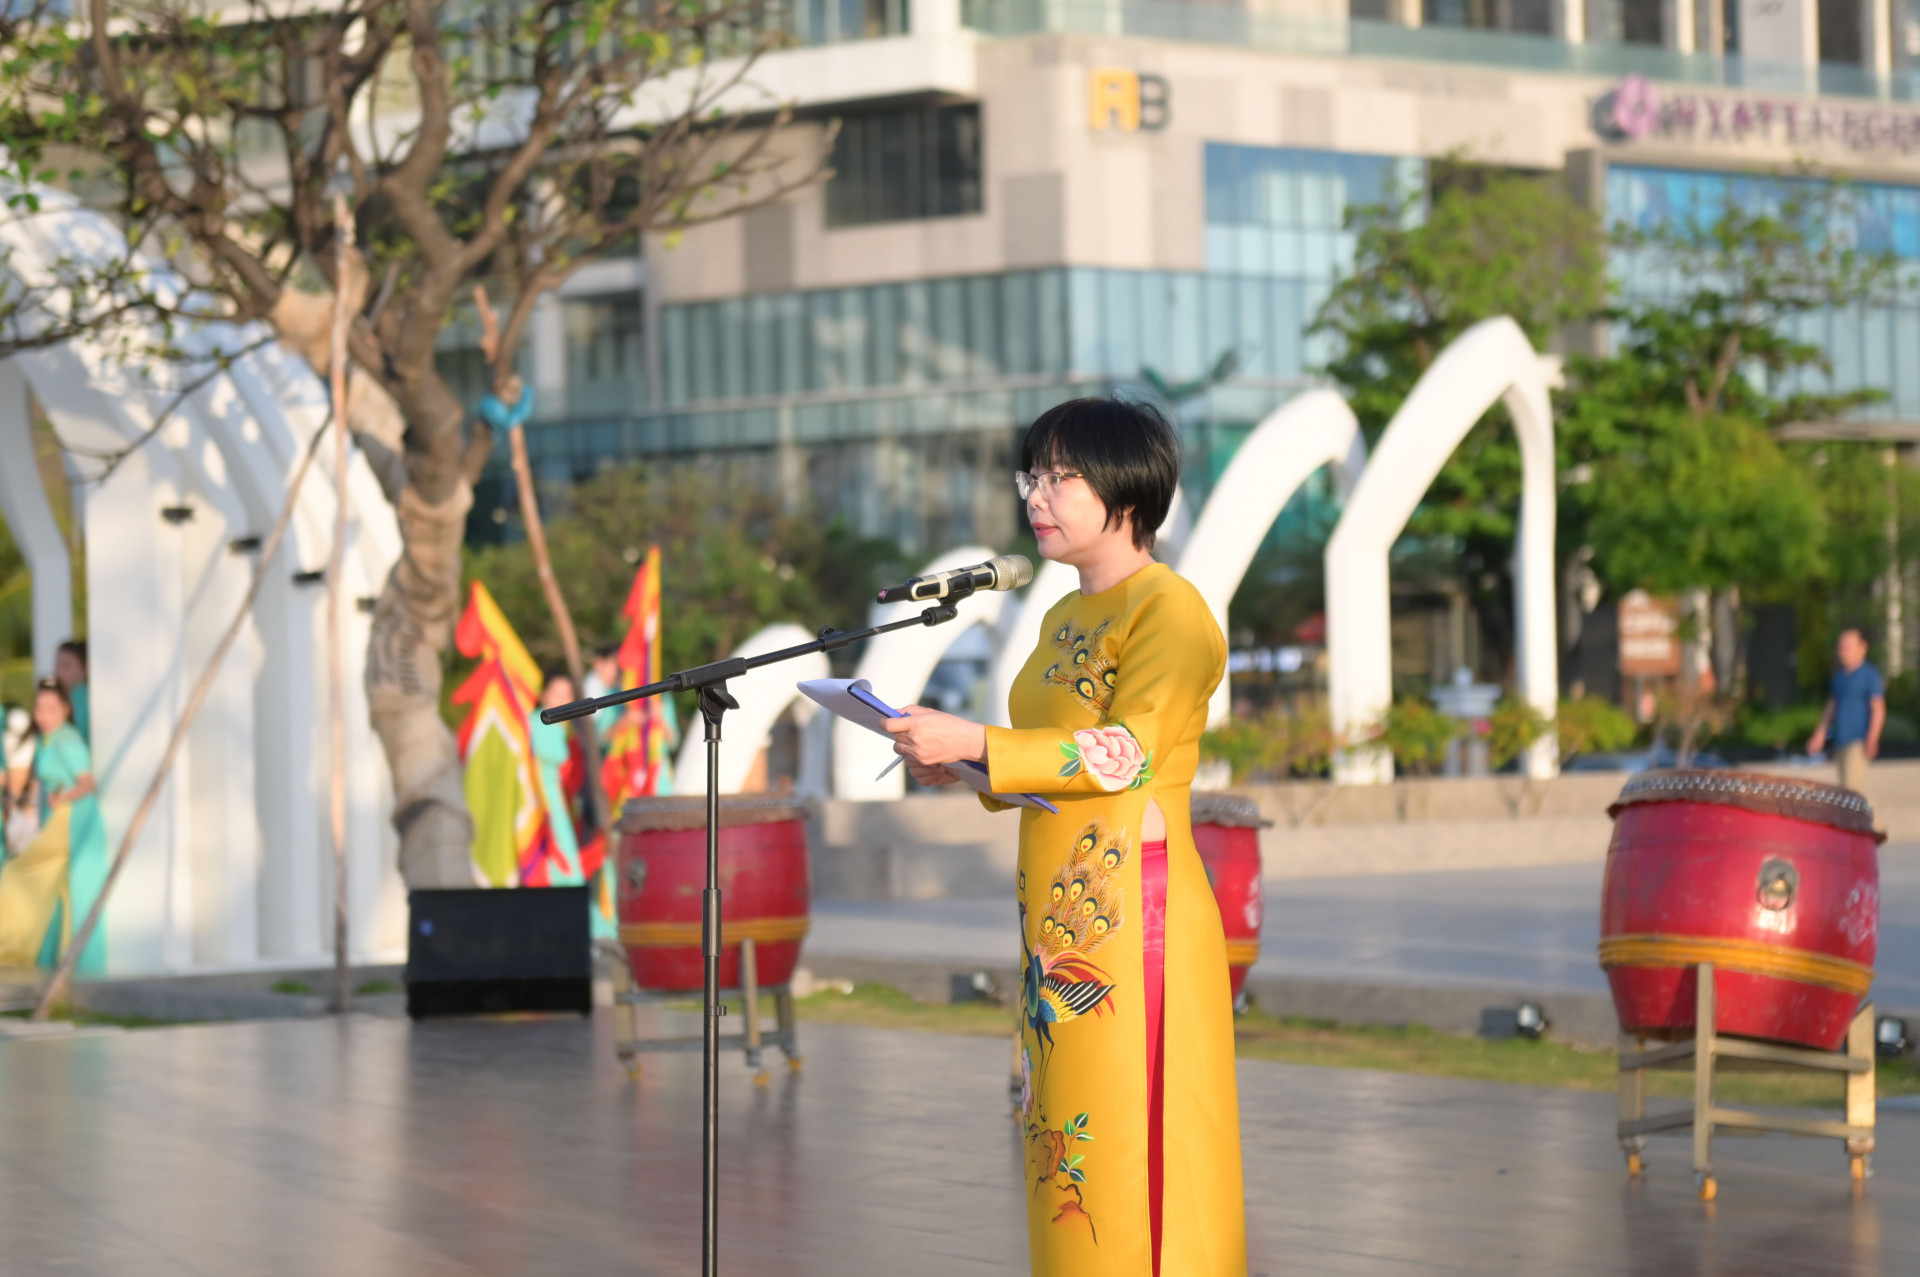 Dinh Thi Hang Nga, chairman of Nha Trang City Women's Union, speaking at the opening ceremony